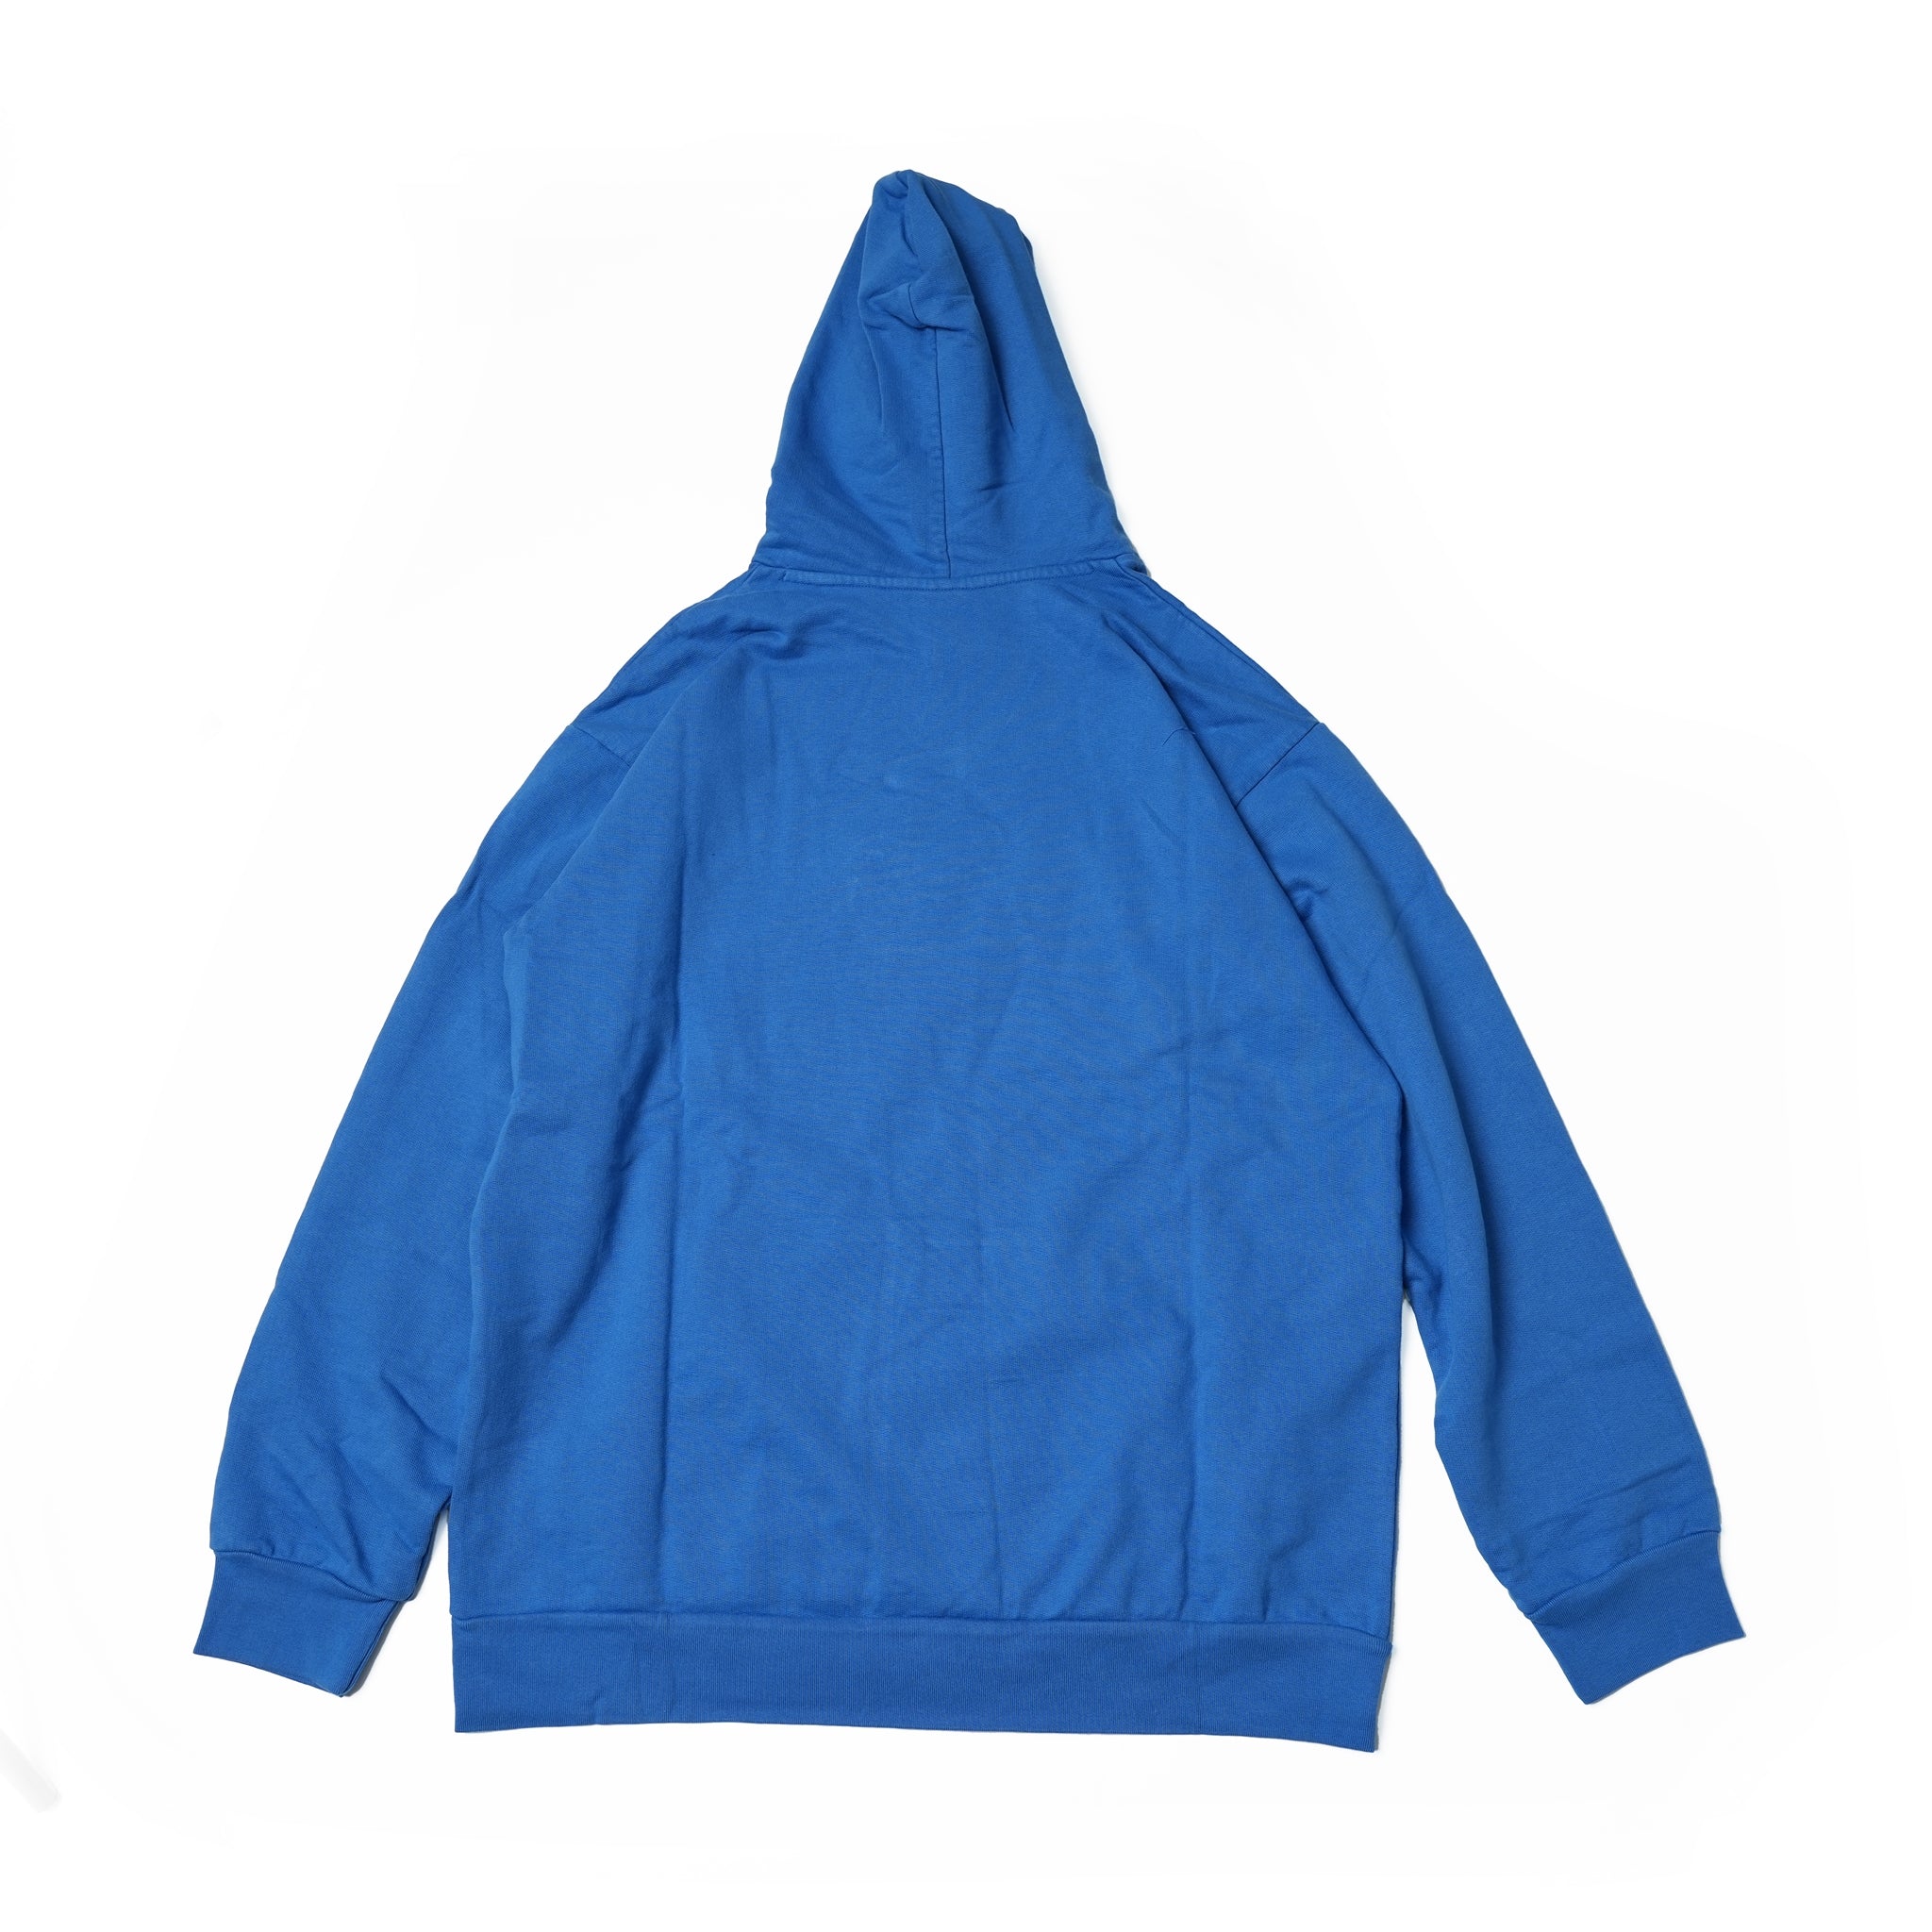 No:TS00357 | Name:TIRED'S HOODIE (ORGANIC COTTON) | Color:Royal【TIRED_タイレッド】